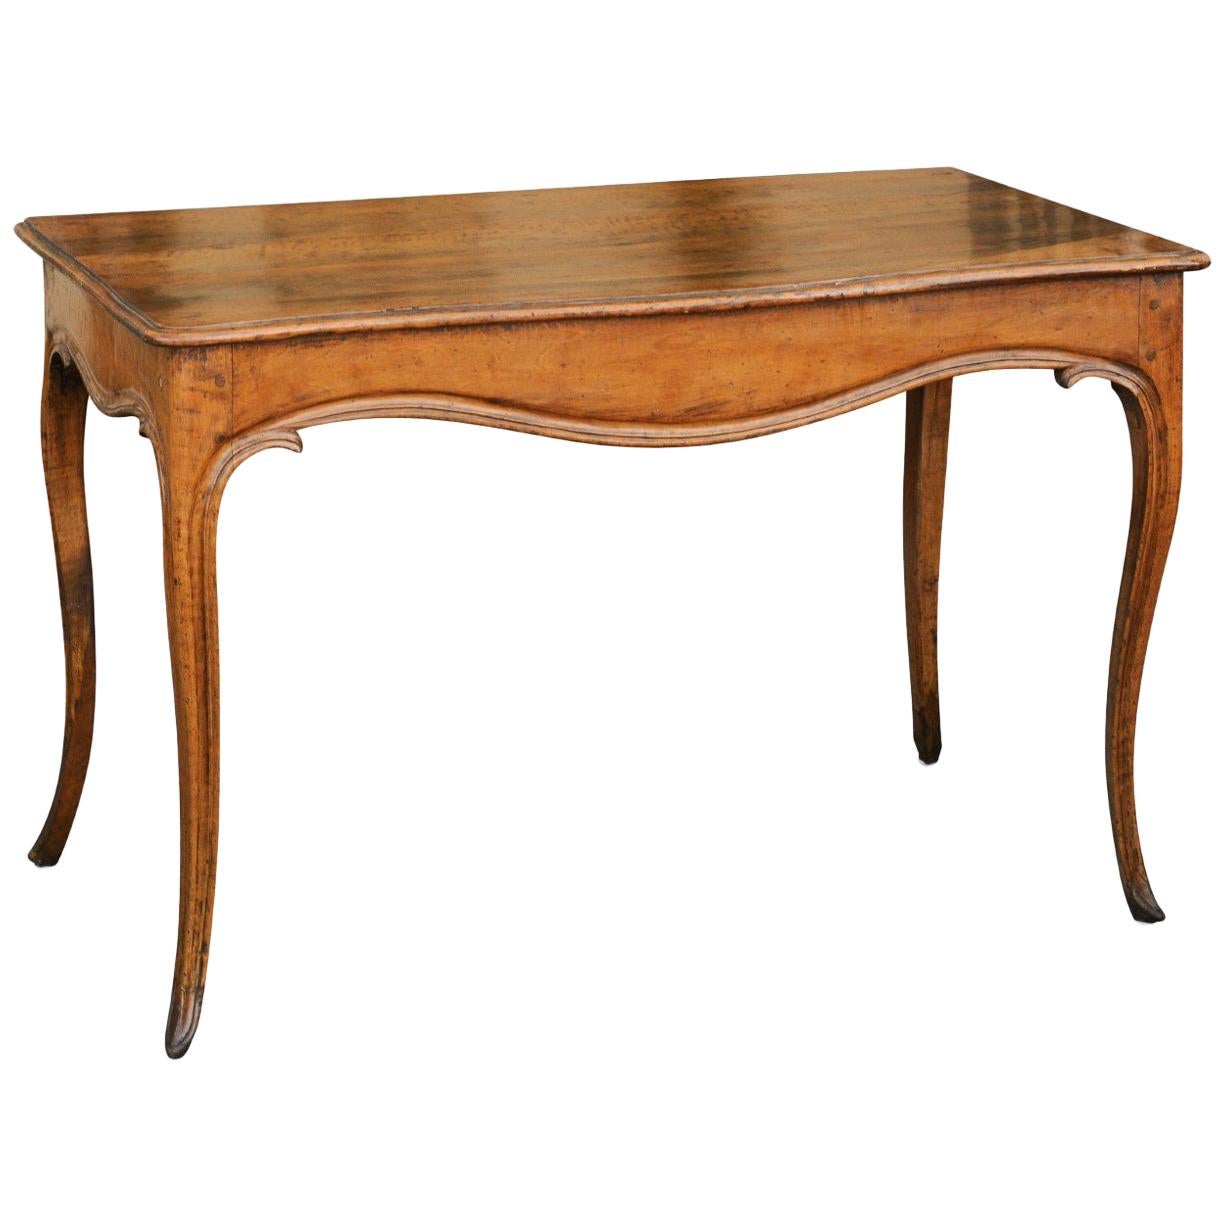 French Louis XV Style Walnut Console Table with Cabriole Legs, circa 1820 For Sale